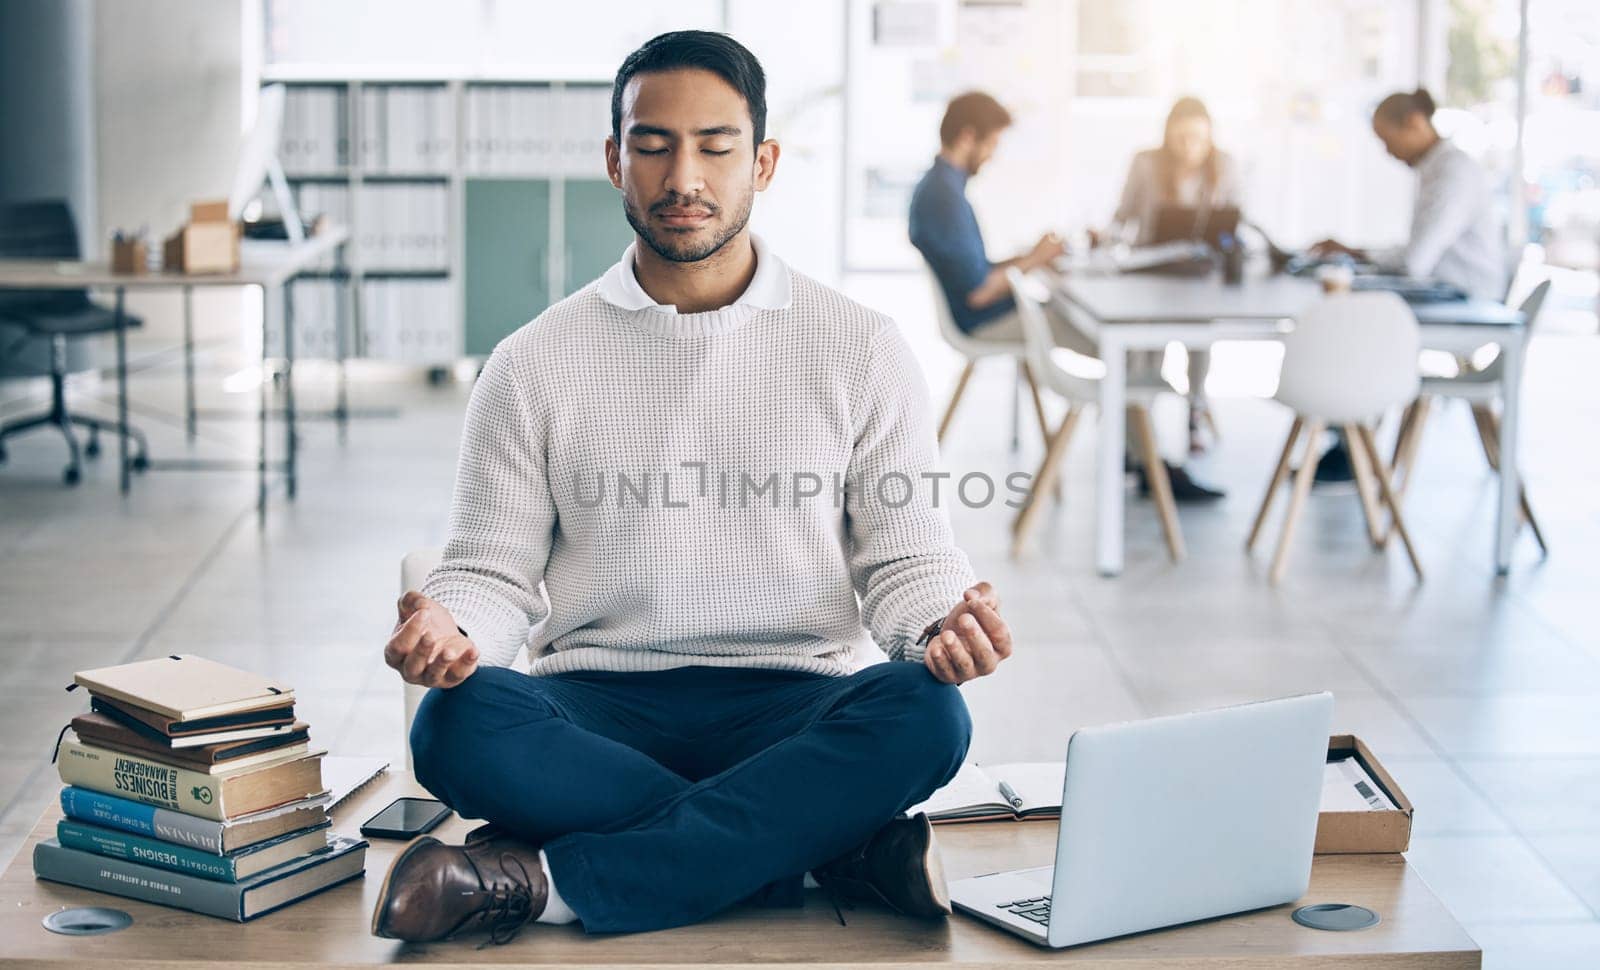 Meditation, relax or businessman with laptop, books or zen peace in office desk for work mindset, wellness or mental health. Corporate, employee or Asian man relaxing, meditating or lotus pose by YuriArcurs